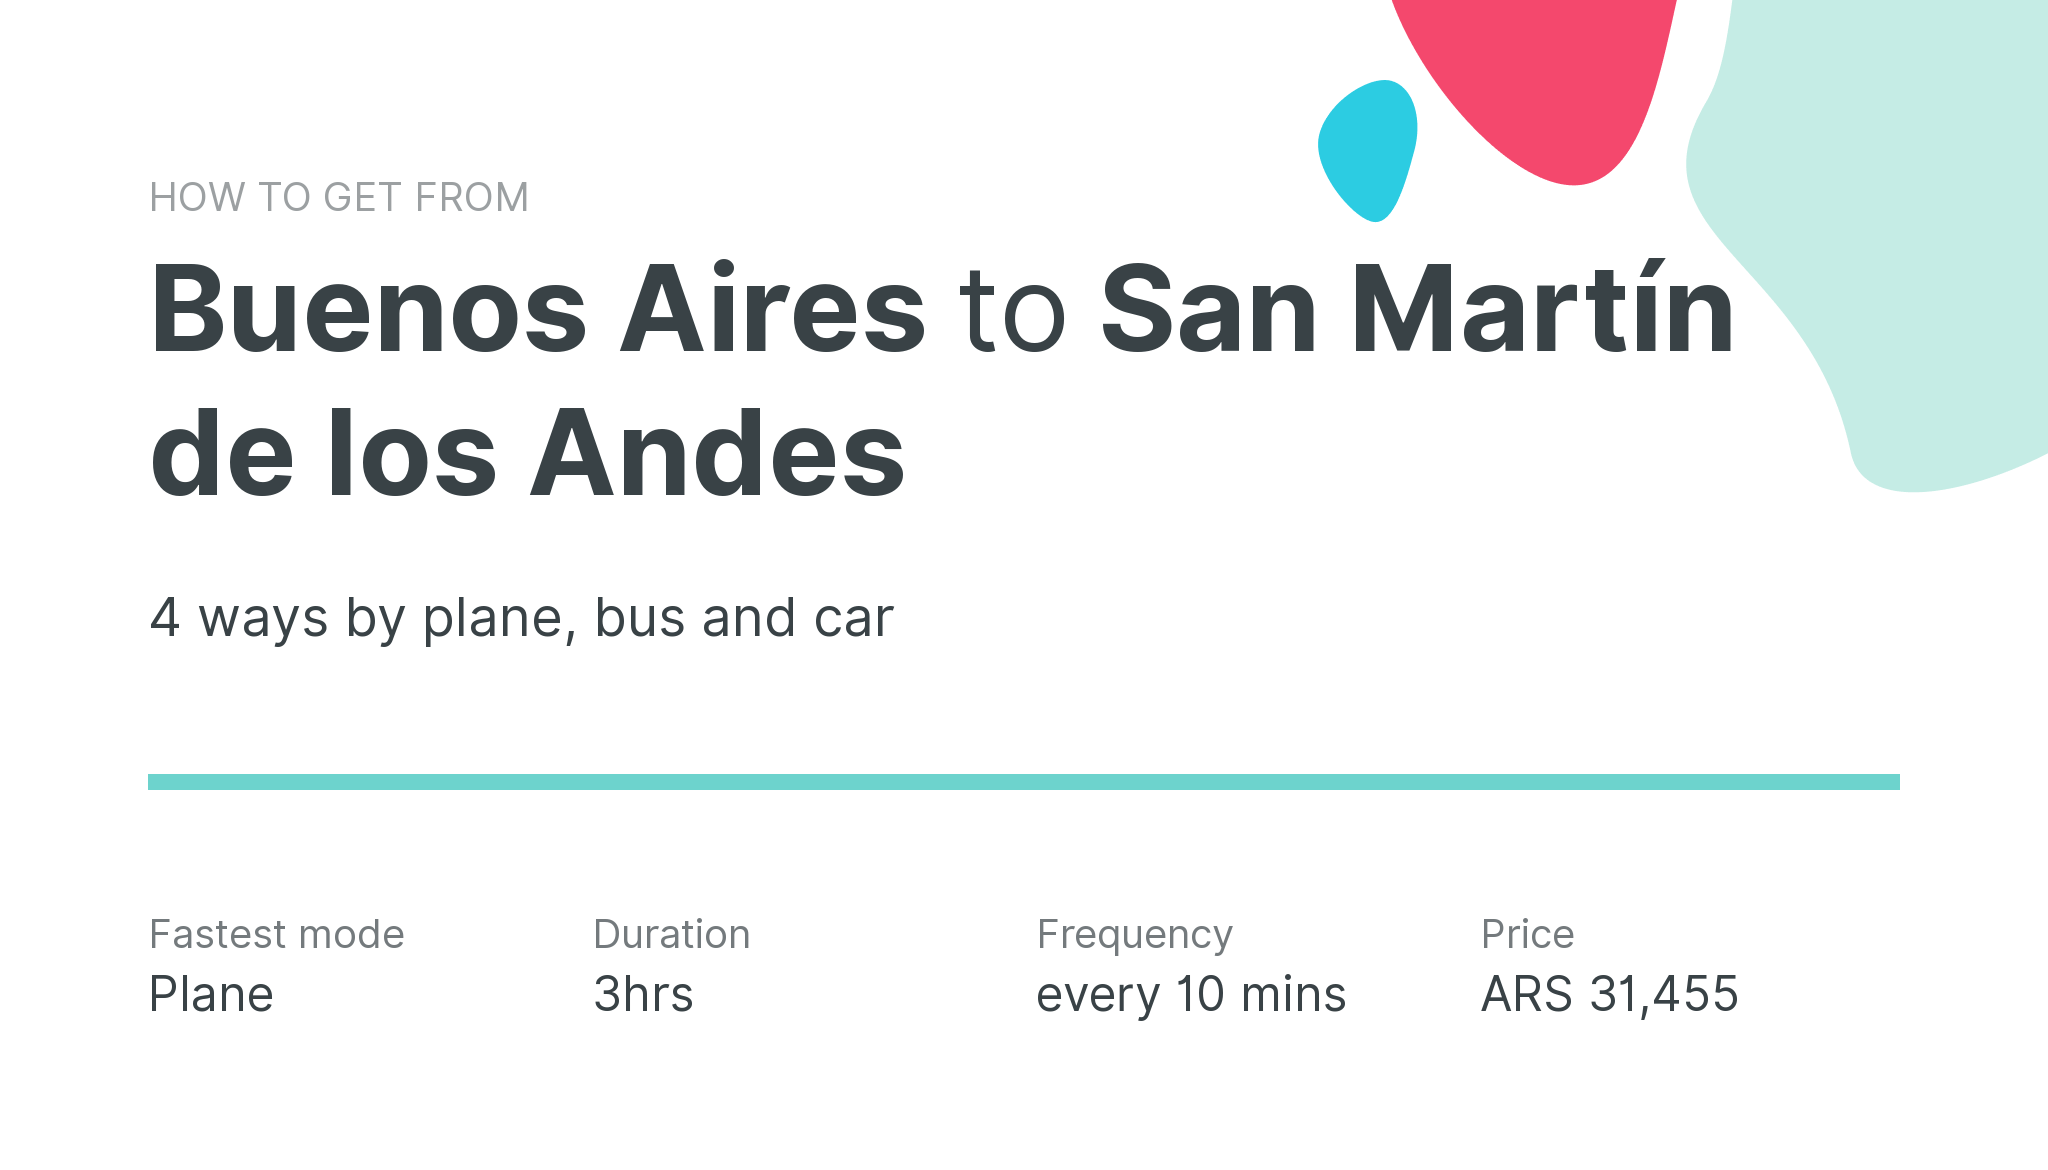 How do I get from Buenos Aires to San Martín de los Andes